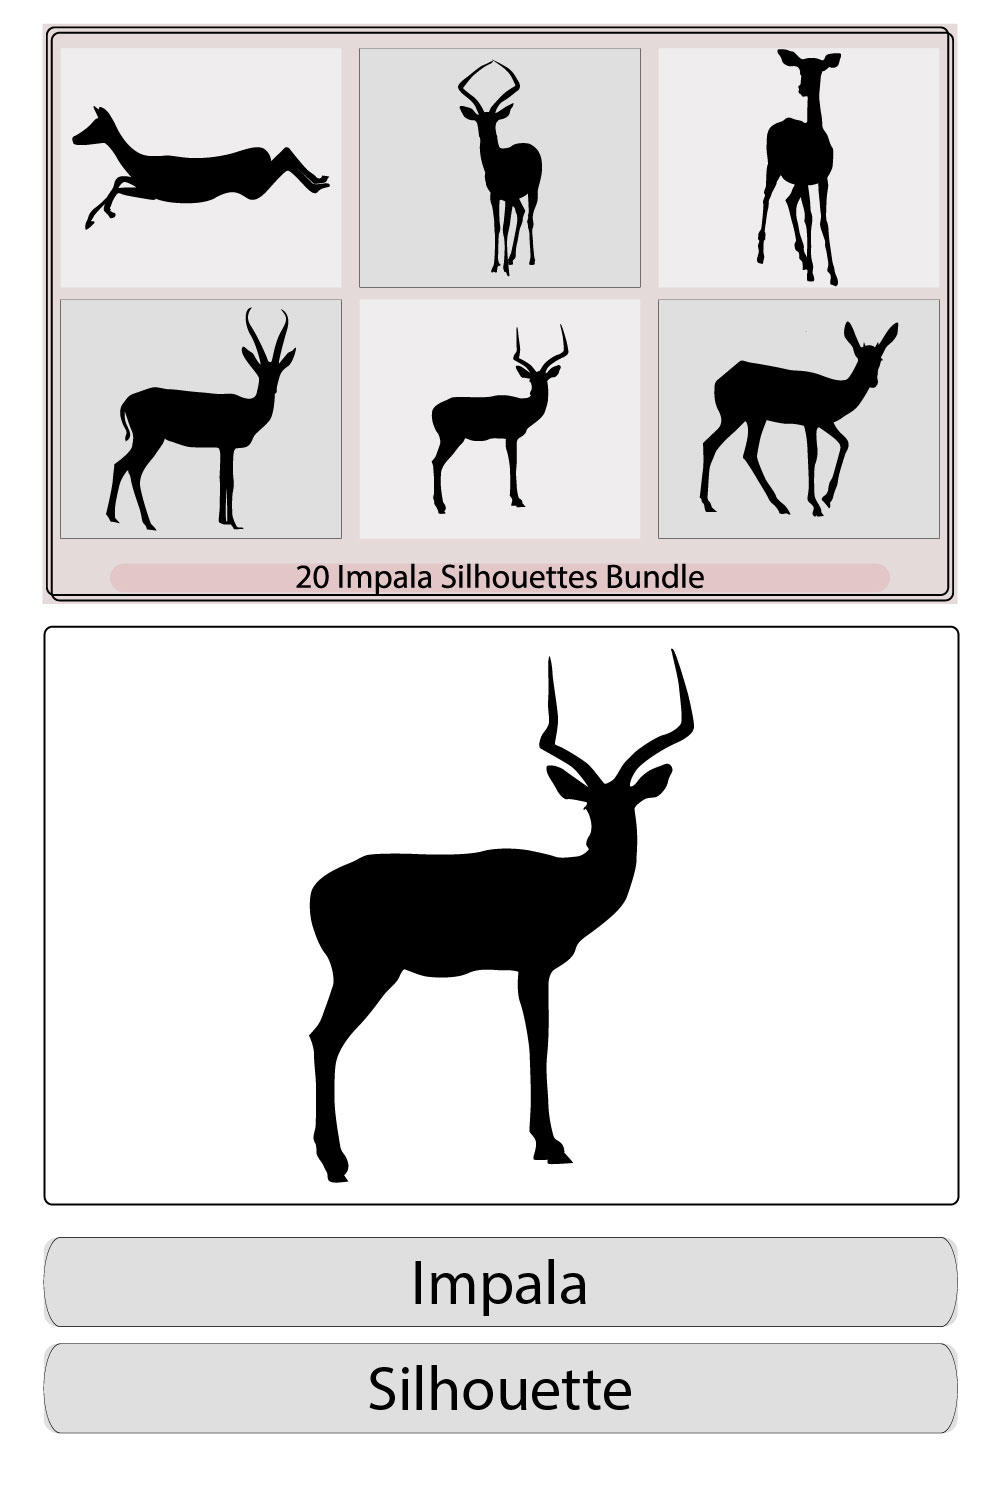 illustration of African impala silhouettes in the wild,Black and white vector silhouettes of Impala,Impala Silhouette Vector Logo For The Best Impala Icon Illustration,Set of editable vector silhouettes of running impala antelopes pinterest preview image.